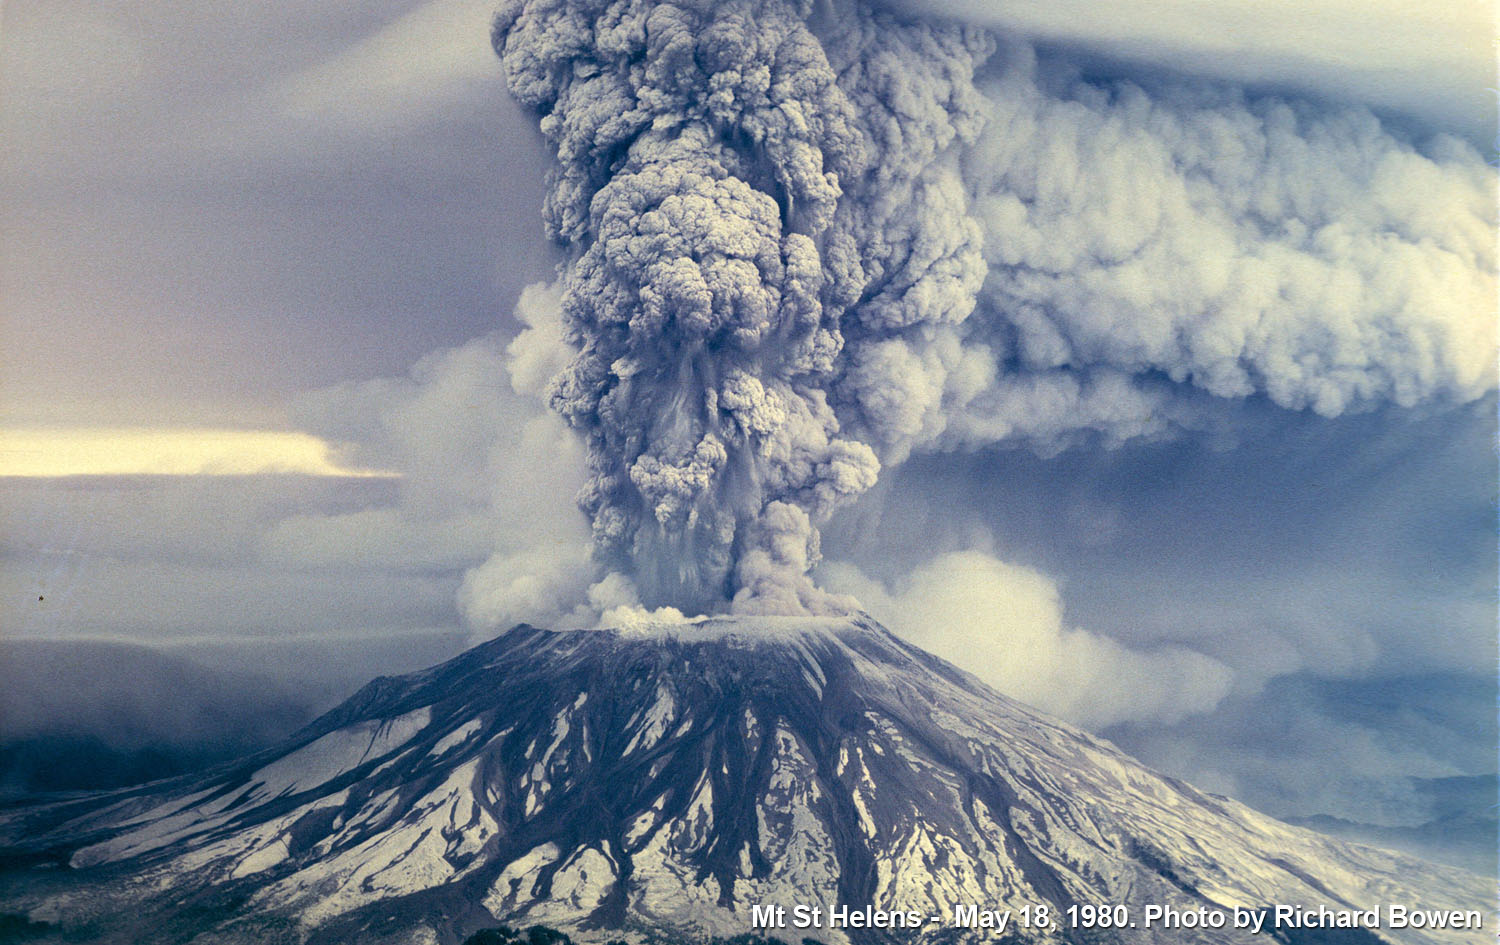 US Passenger Vehicle Emissions Comparable to 1980 Mt. St Helens Eruption Occurring Every 3 Days